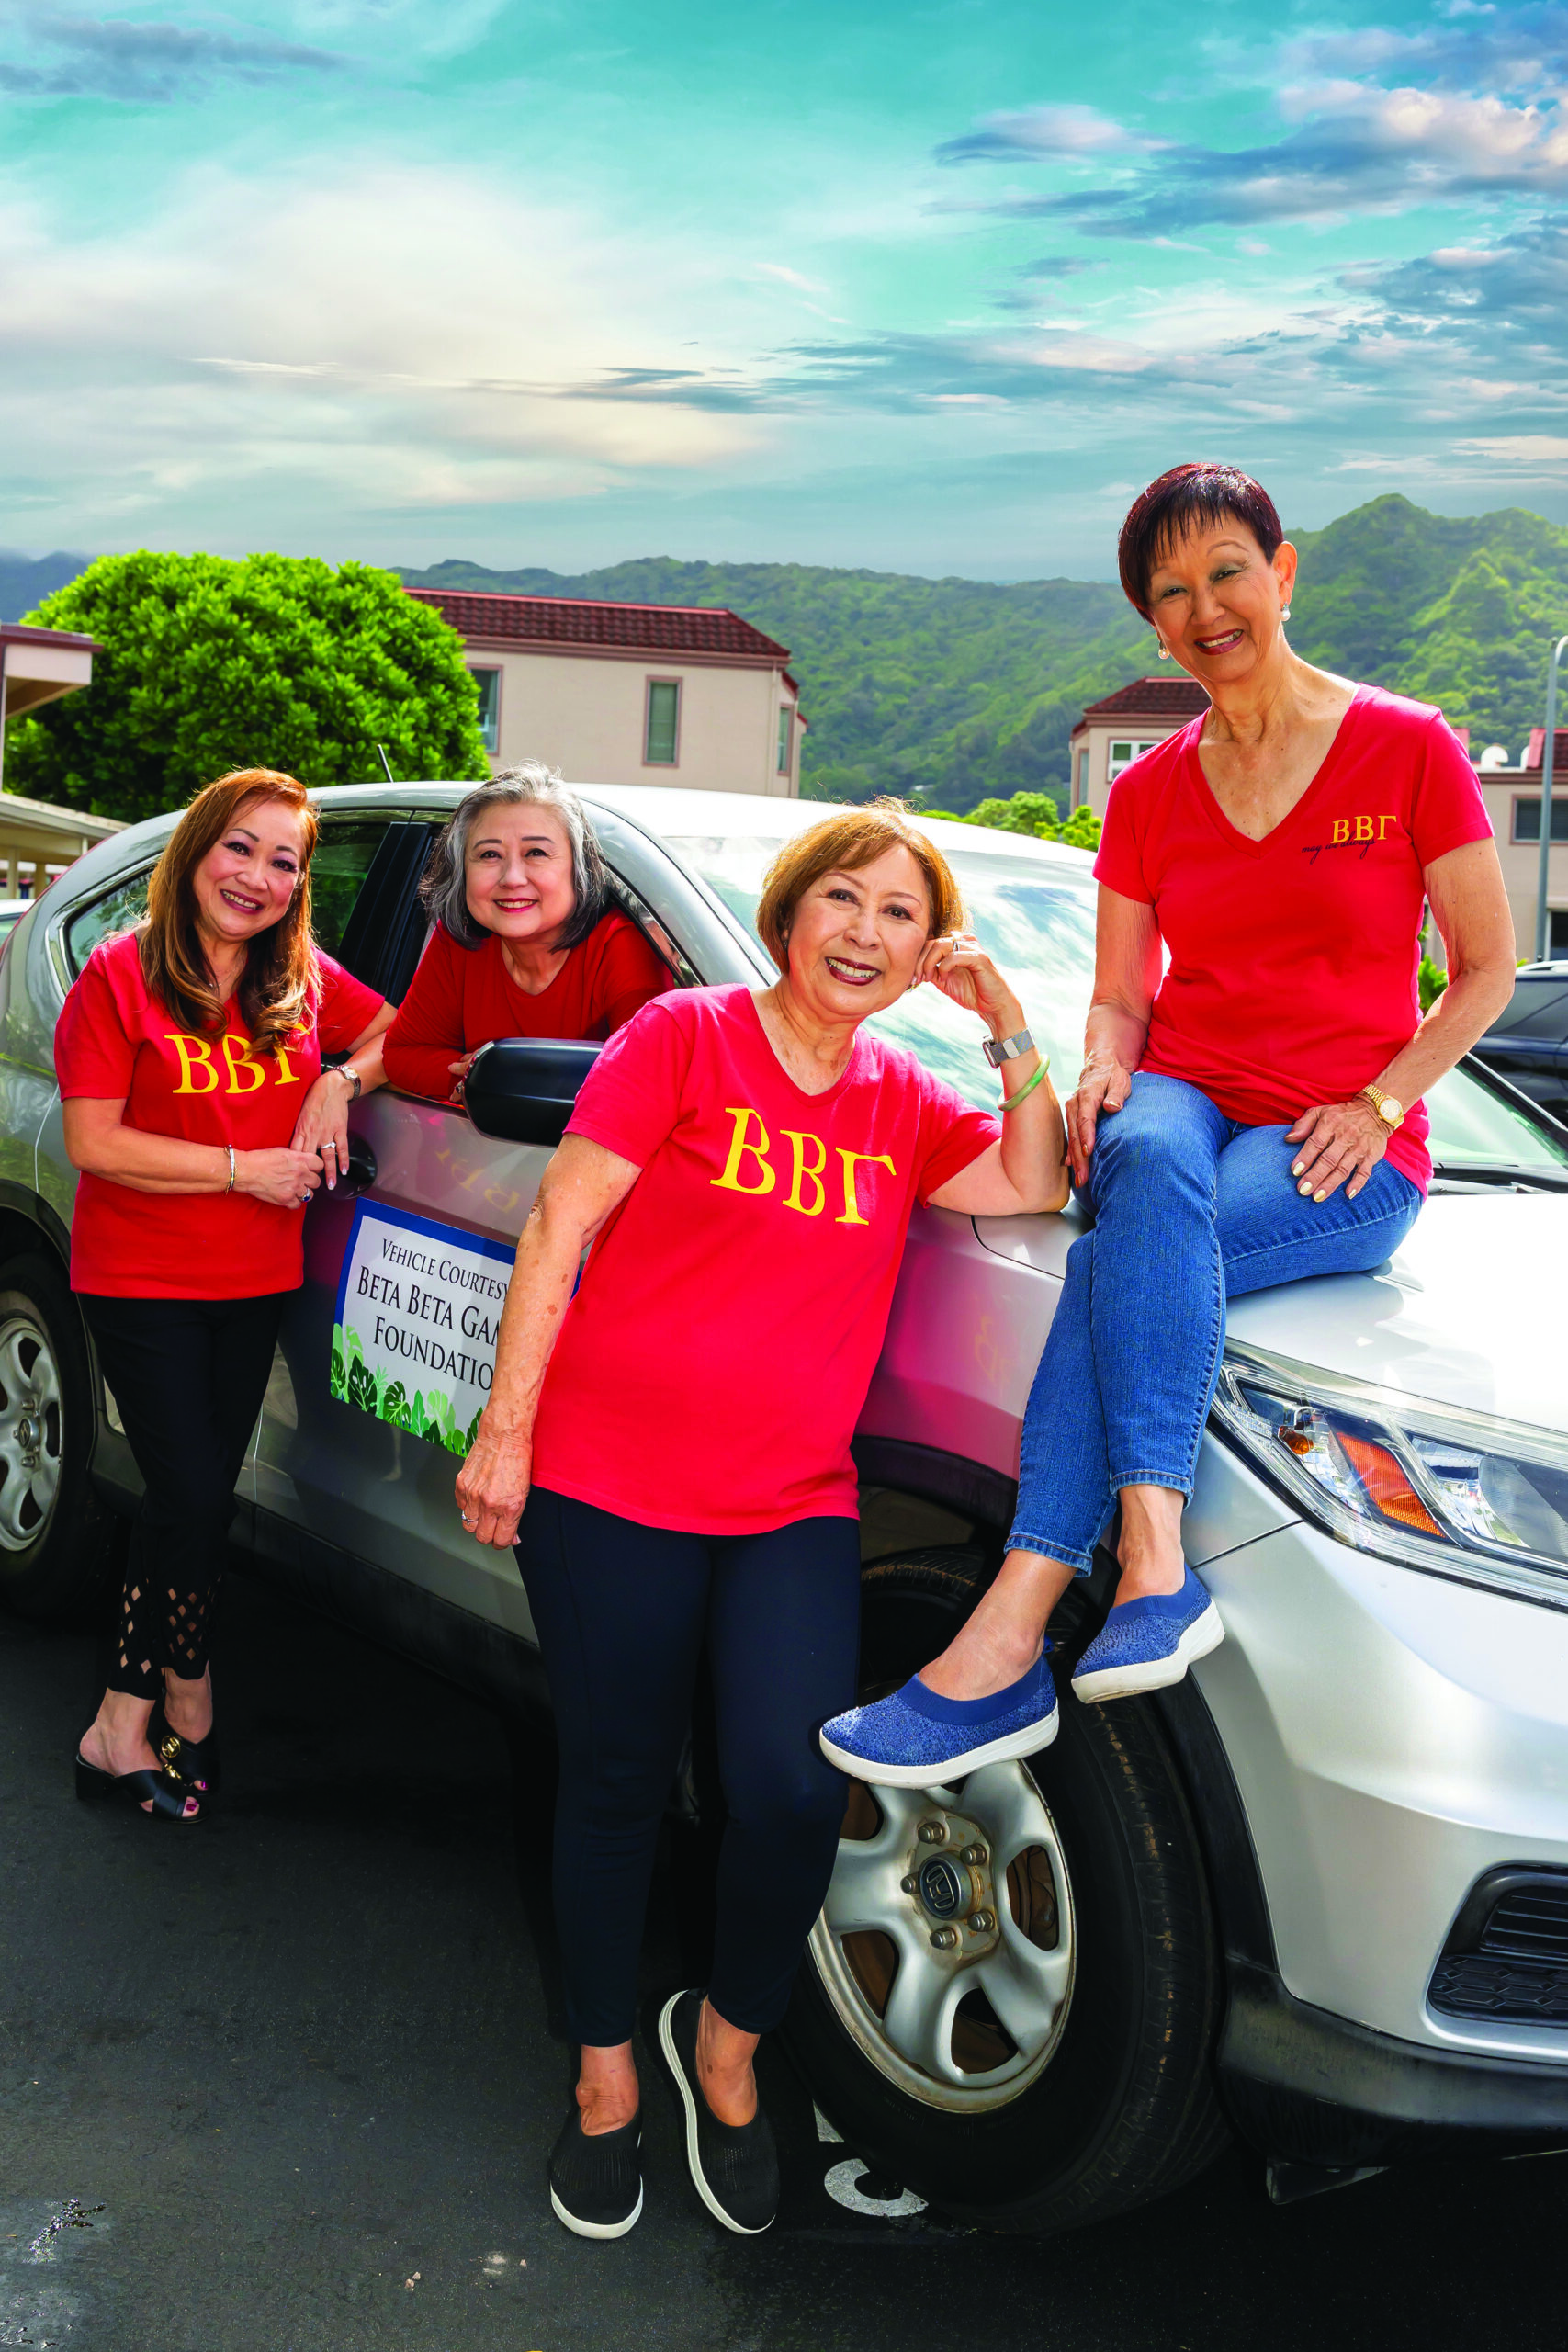 Seen here with one of two Hawaii MealsOn Wheels delivery vehicles Beta Beta Gamma Foundation helped purchase, are board members (L-R) Kalene Sakamoto, Wendy Ann Kuwahara, Donna Hoshide and Aileen Shin.